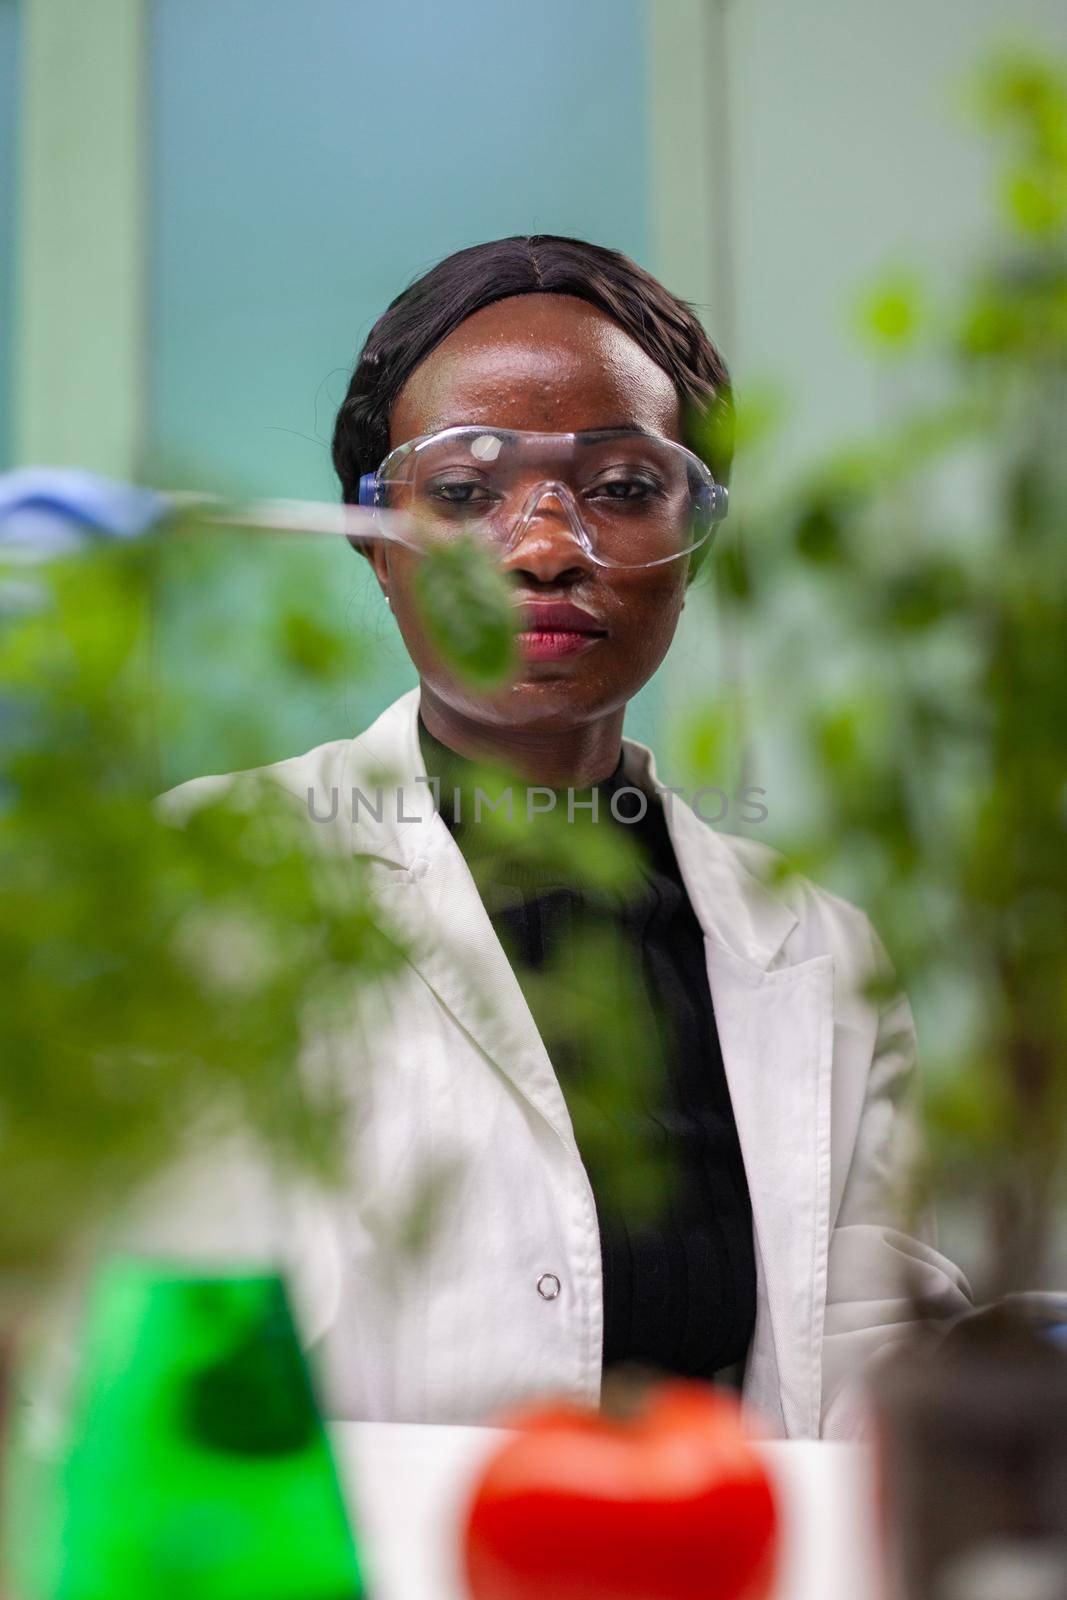 African researcher taking green leaf sample from petri dish putting under microscope by DCStudio